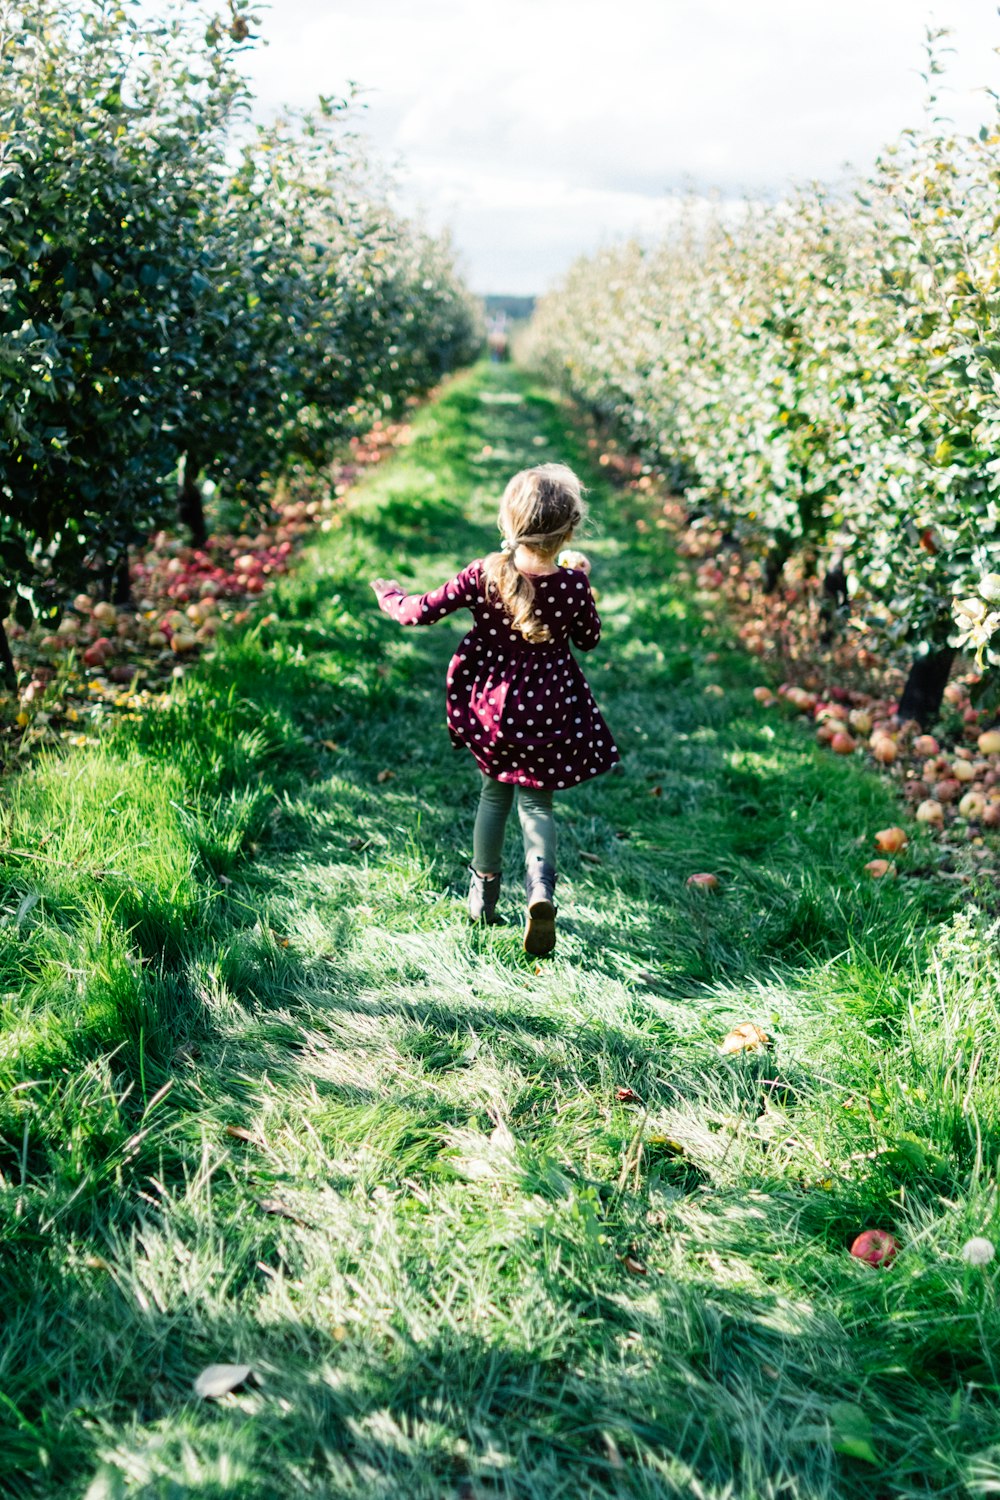 girl wearing maroon and white polka-dot dress running on grass pathway field